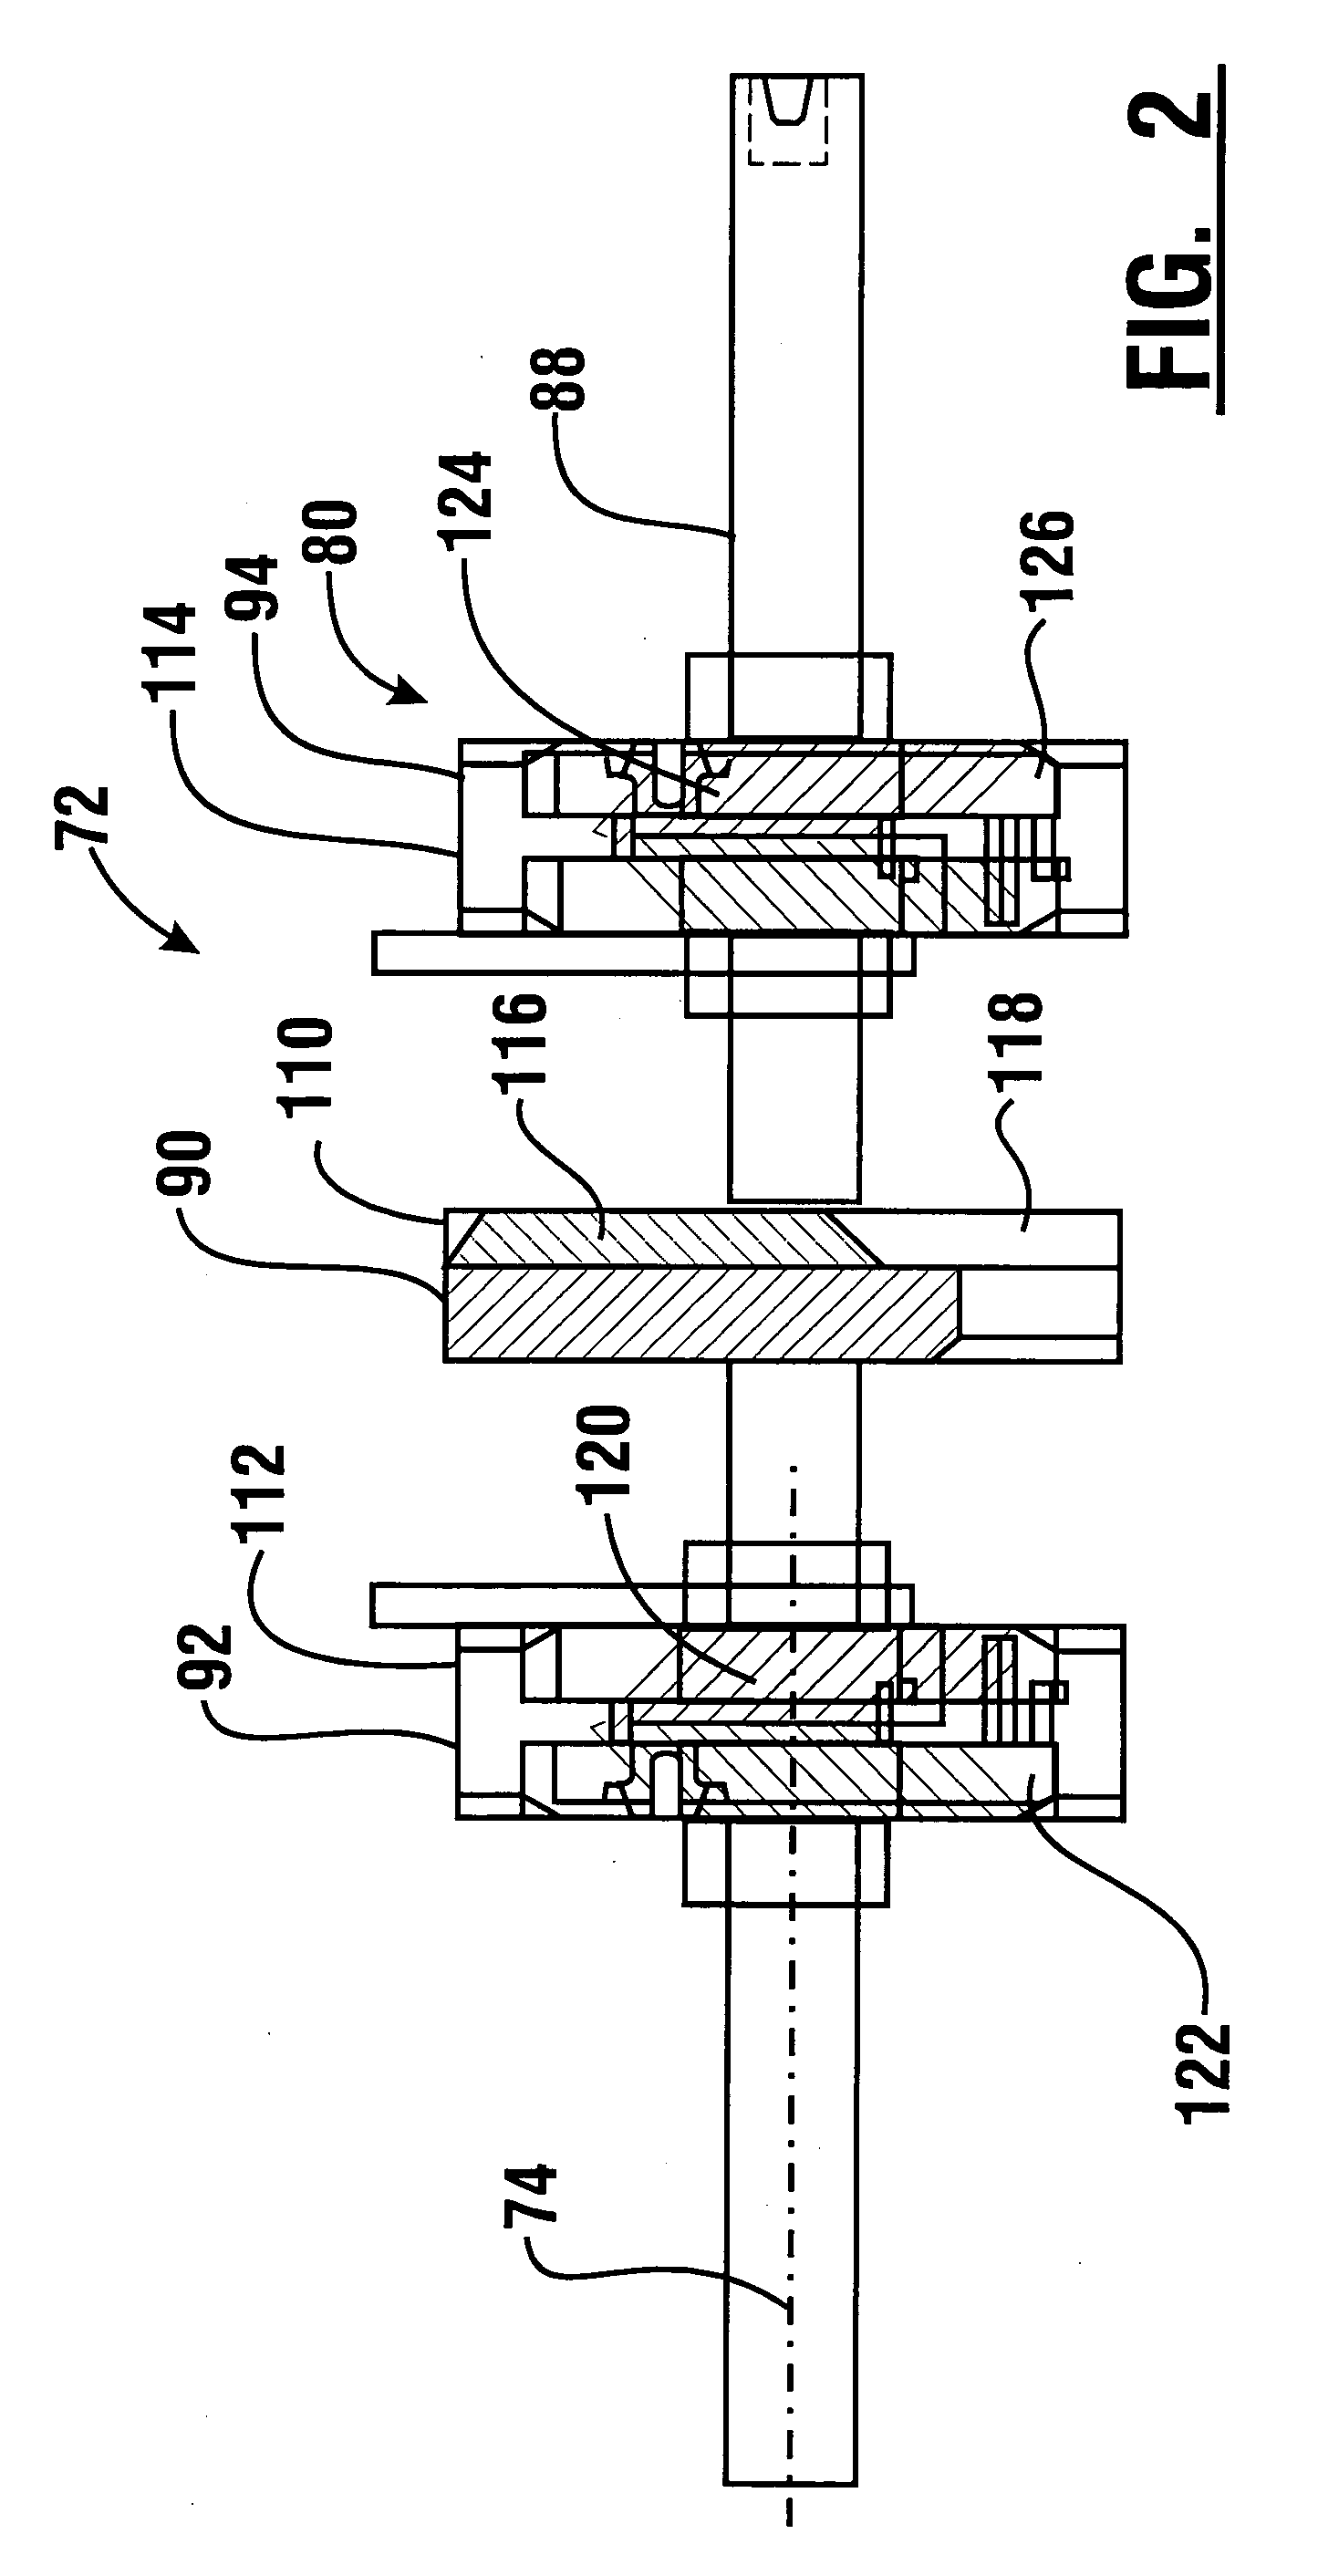 Cash dispensing automated banking machine and method